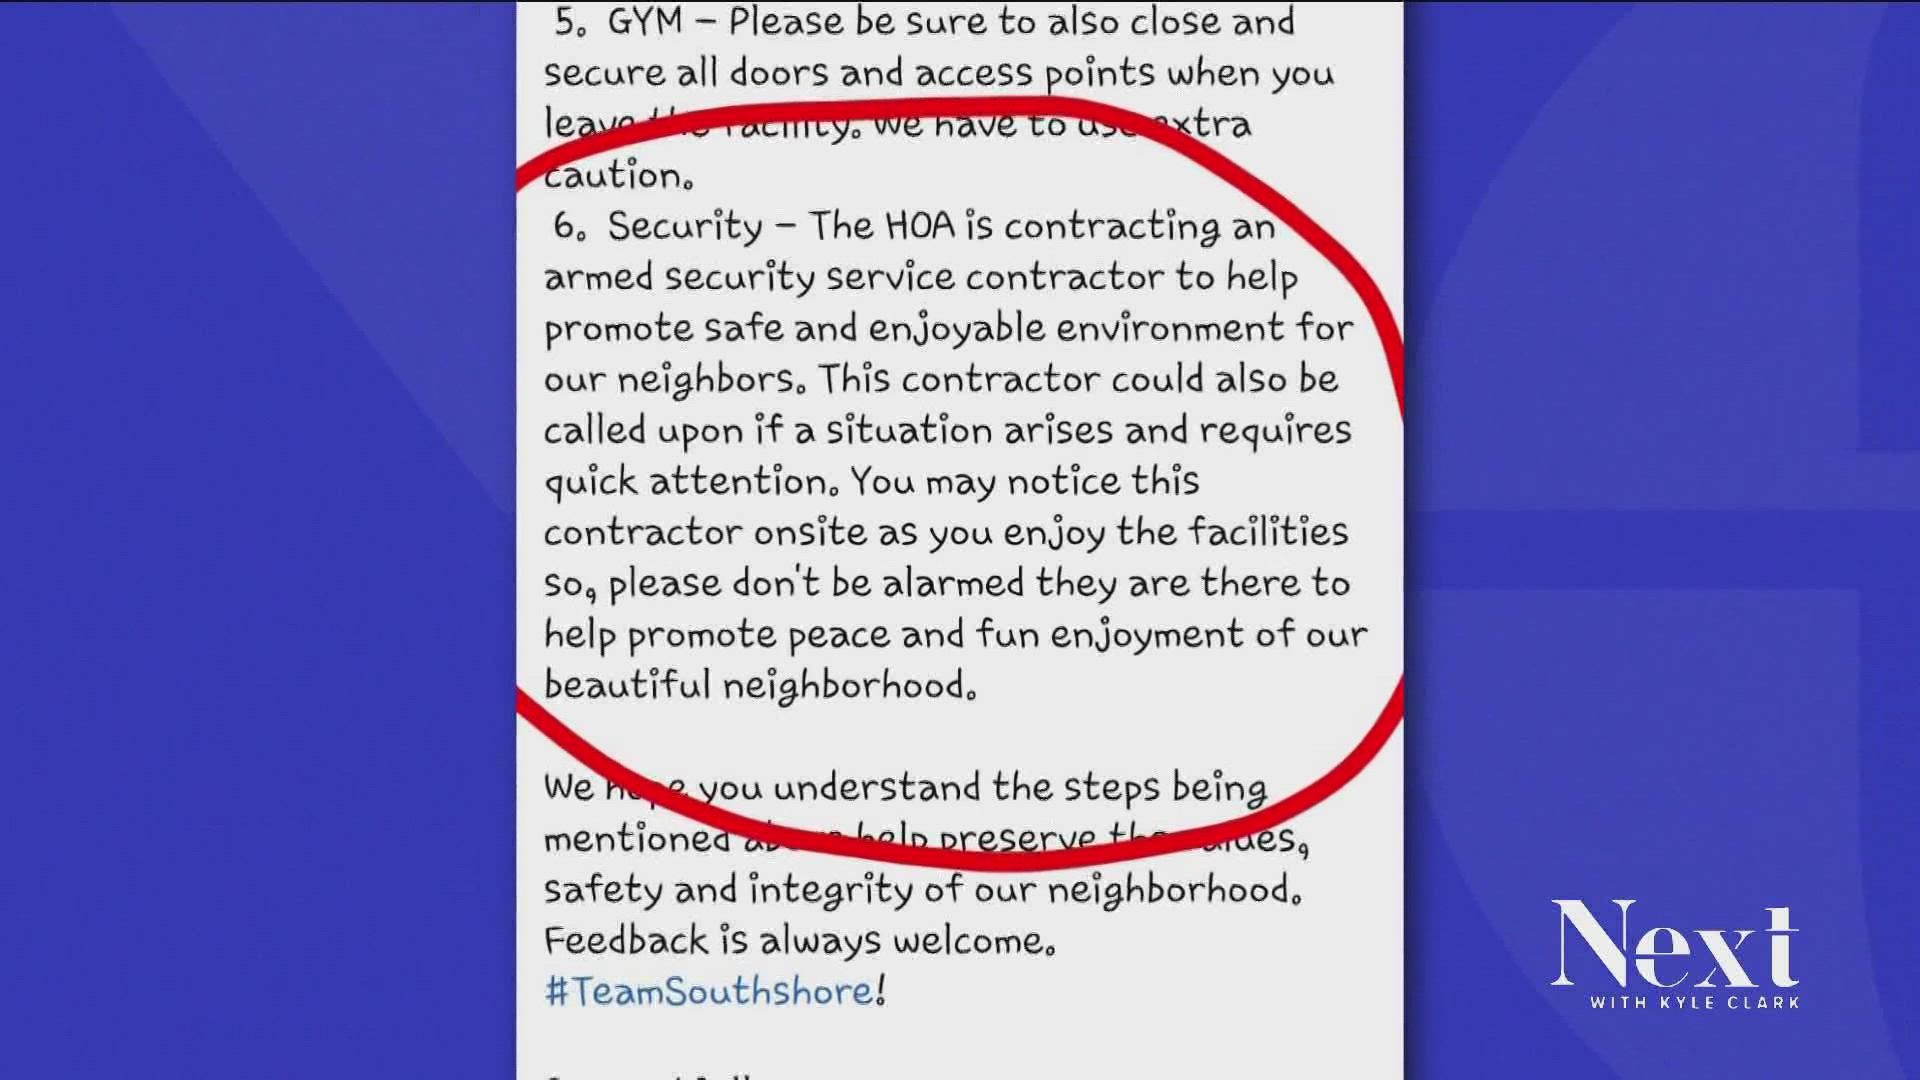 An email says Southshore Master HOA is "contracting an armed security service contractor to help promote safe and enjoyable environment for our neighbors."